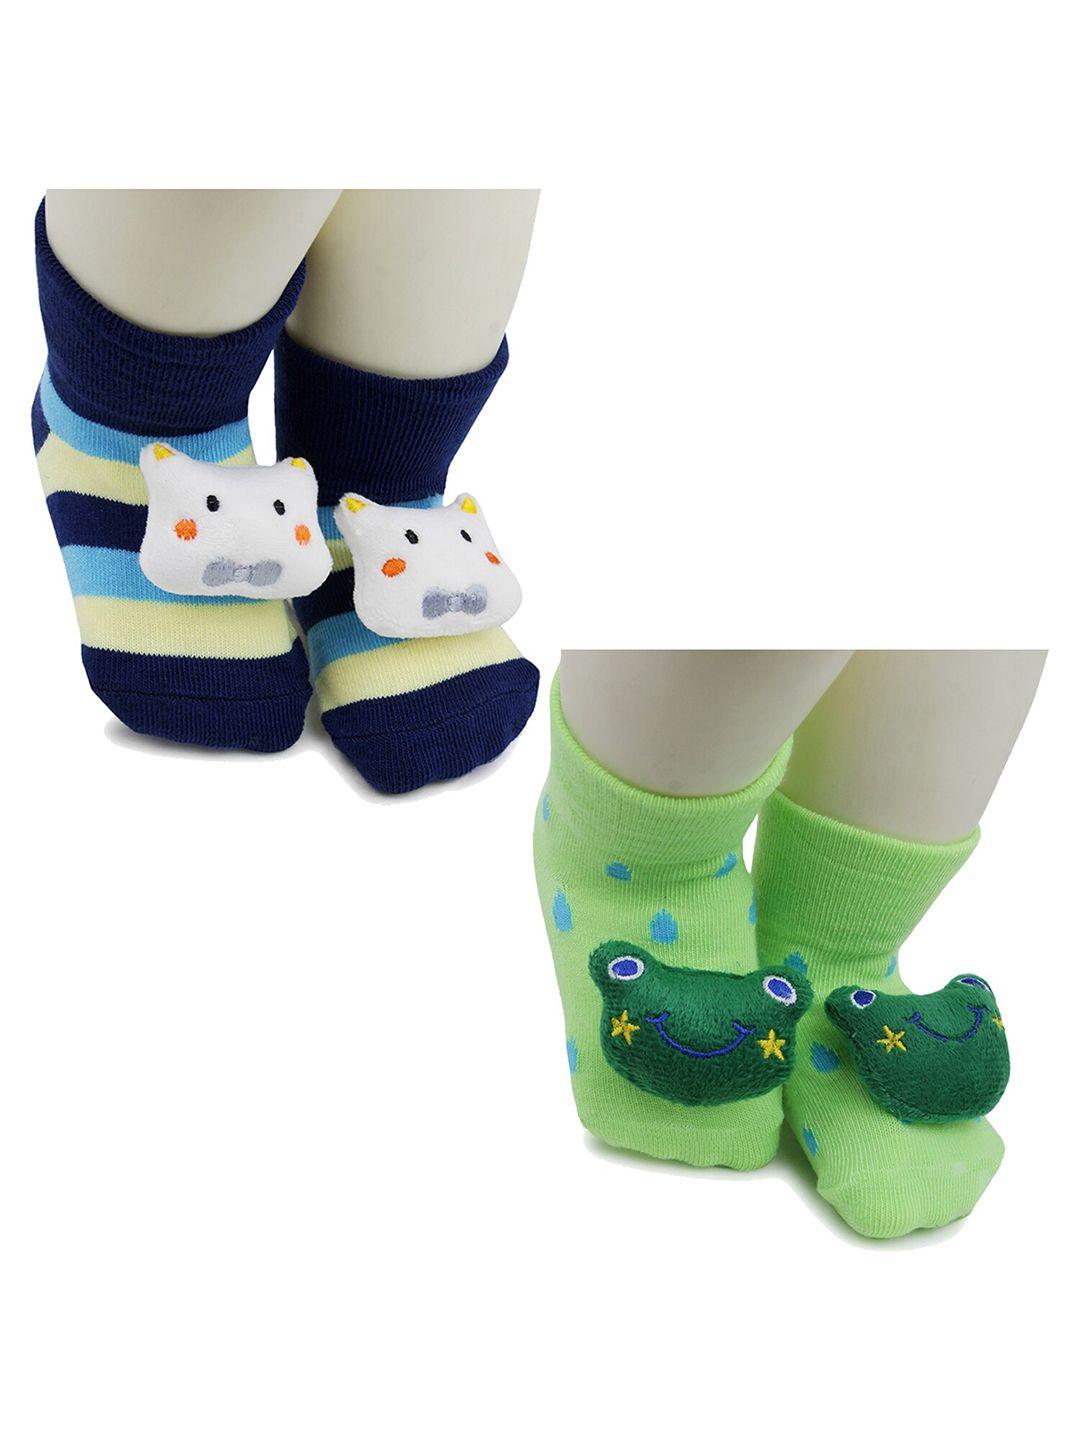 baesd infants pack of 2 patterned anti-skid cotton above ankle length socks